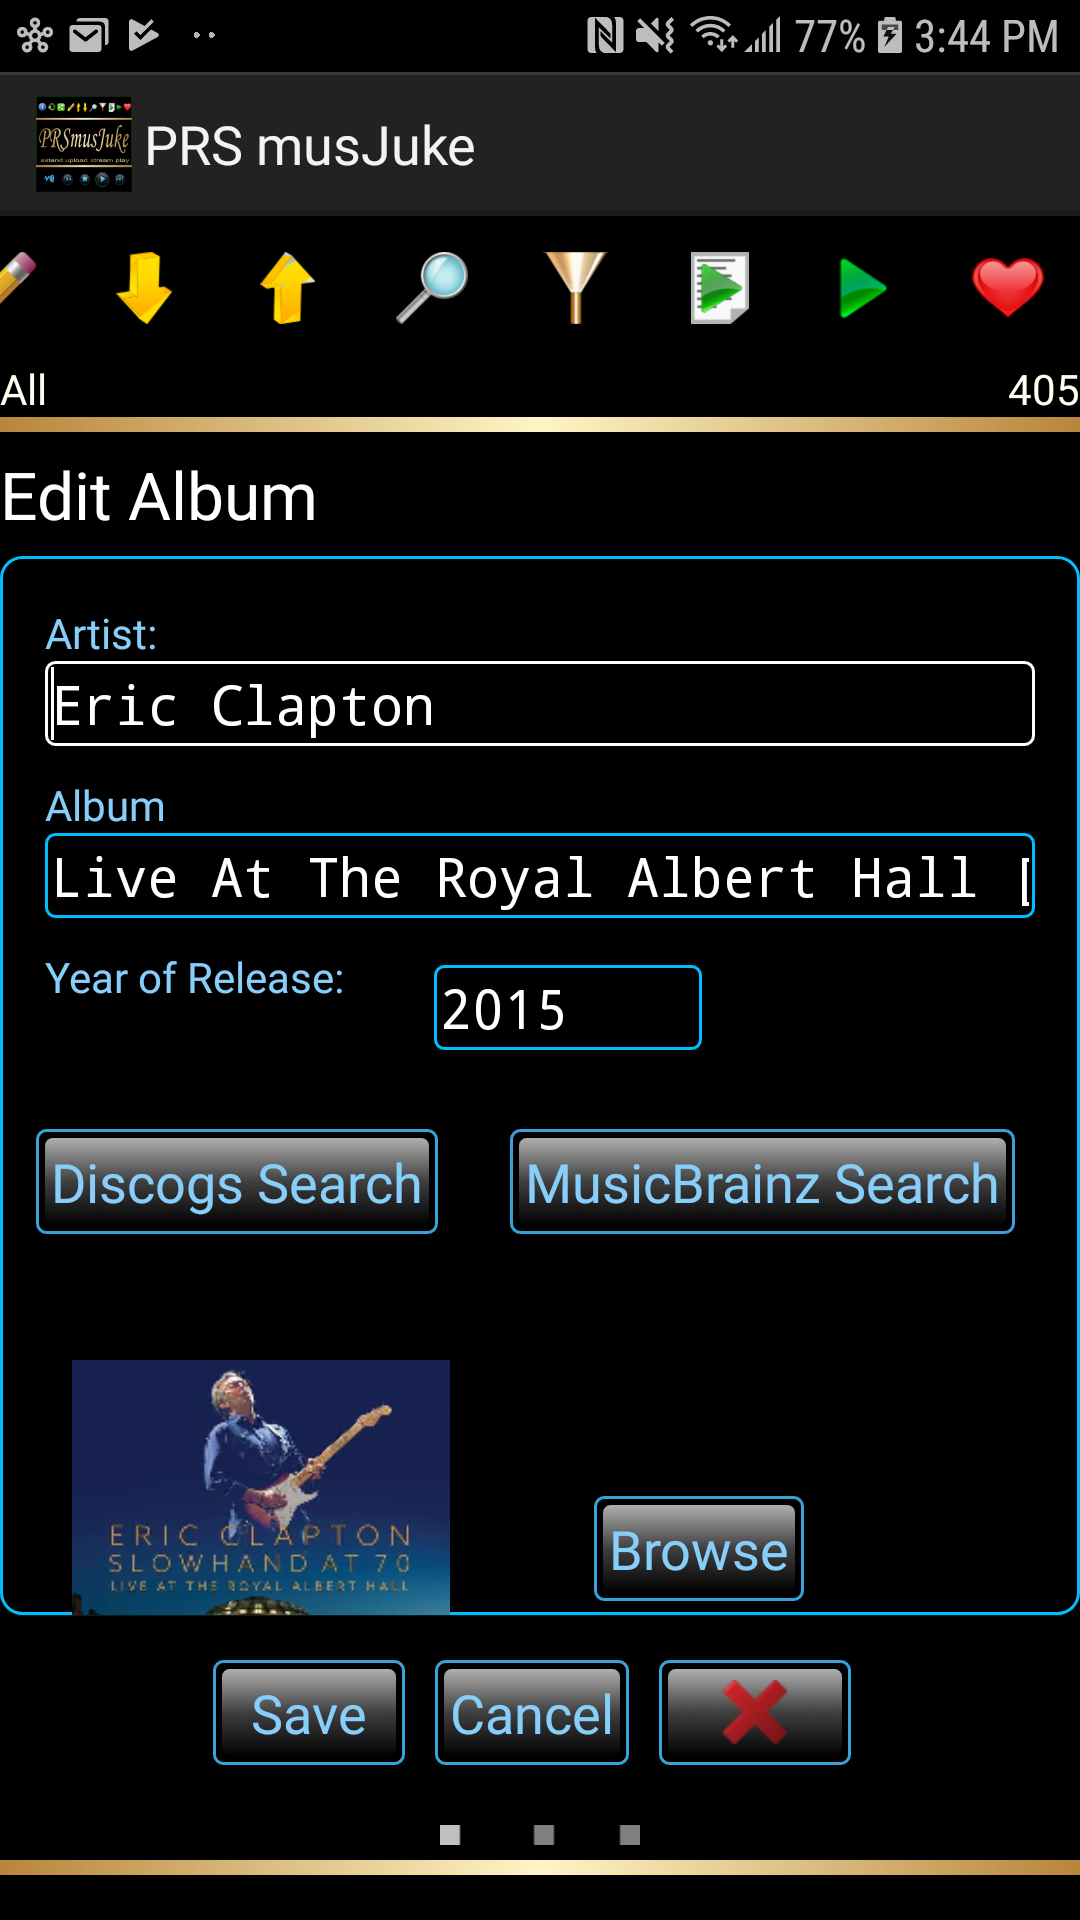 Edit Album or lookup Album on MusicBrainz or Discogs.  Browse your network for new Album Art